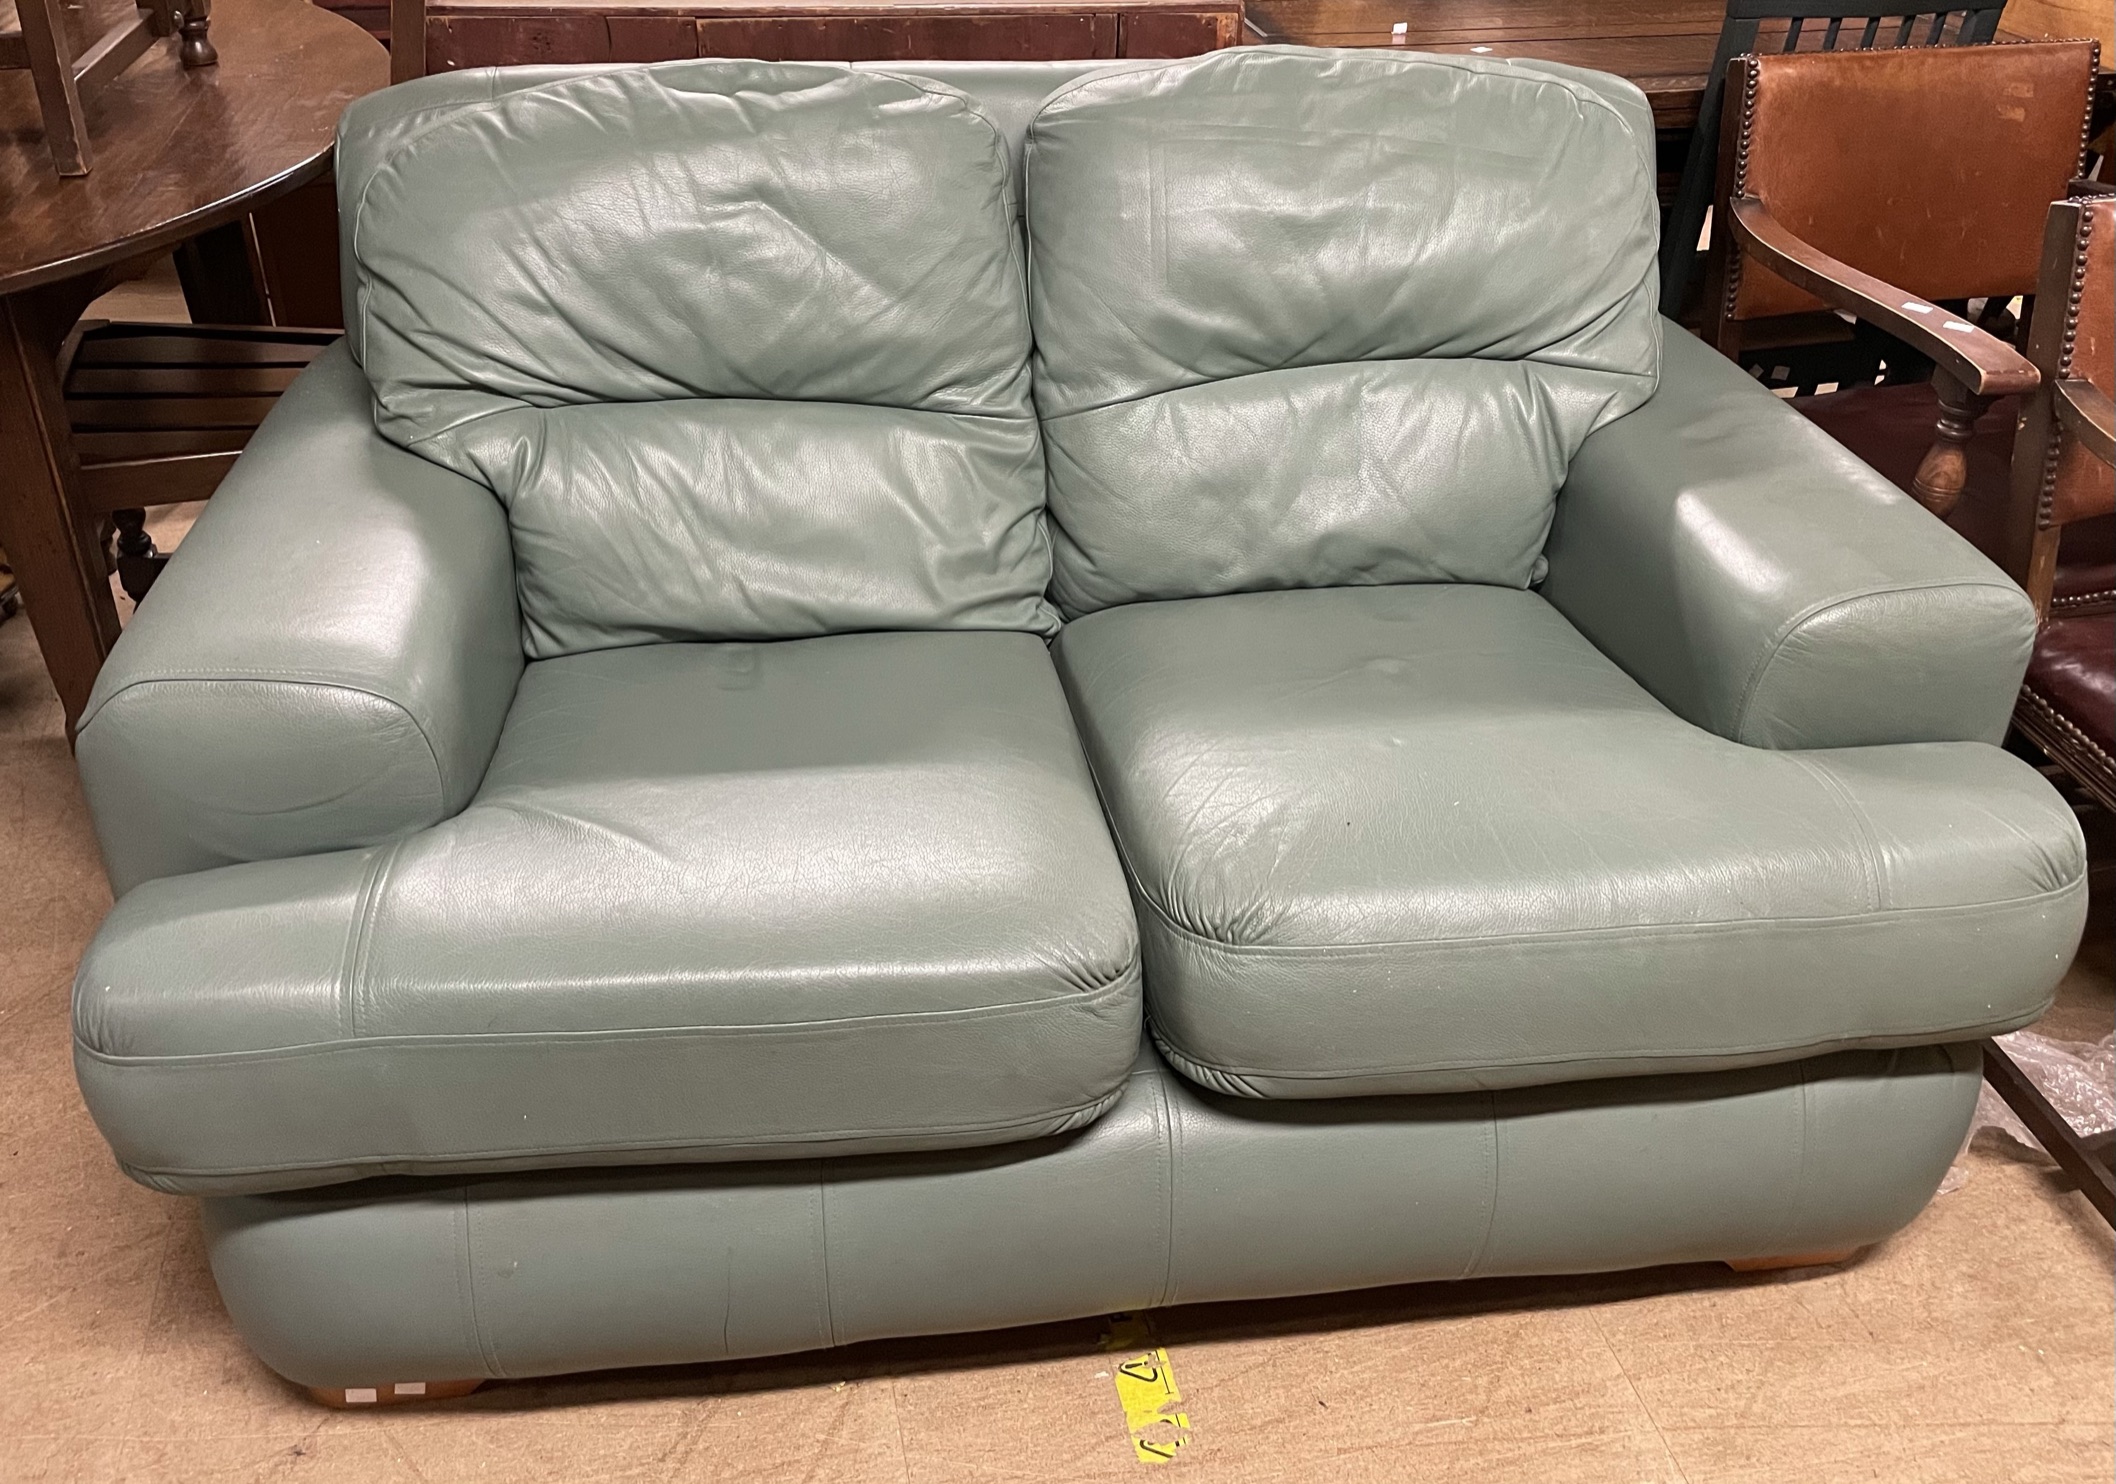 A green leather two seater settee